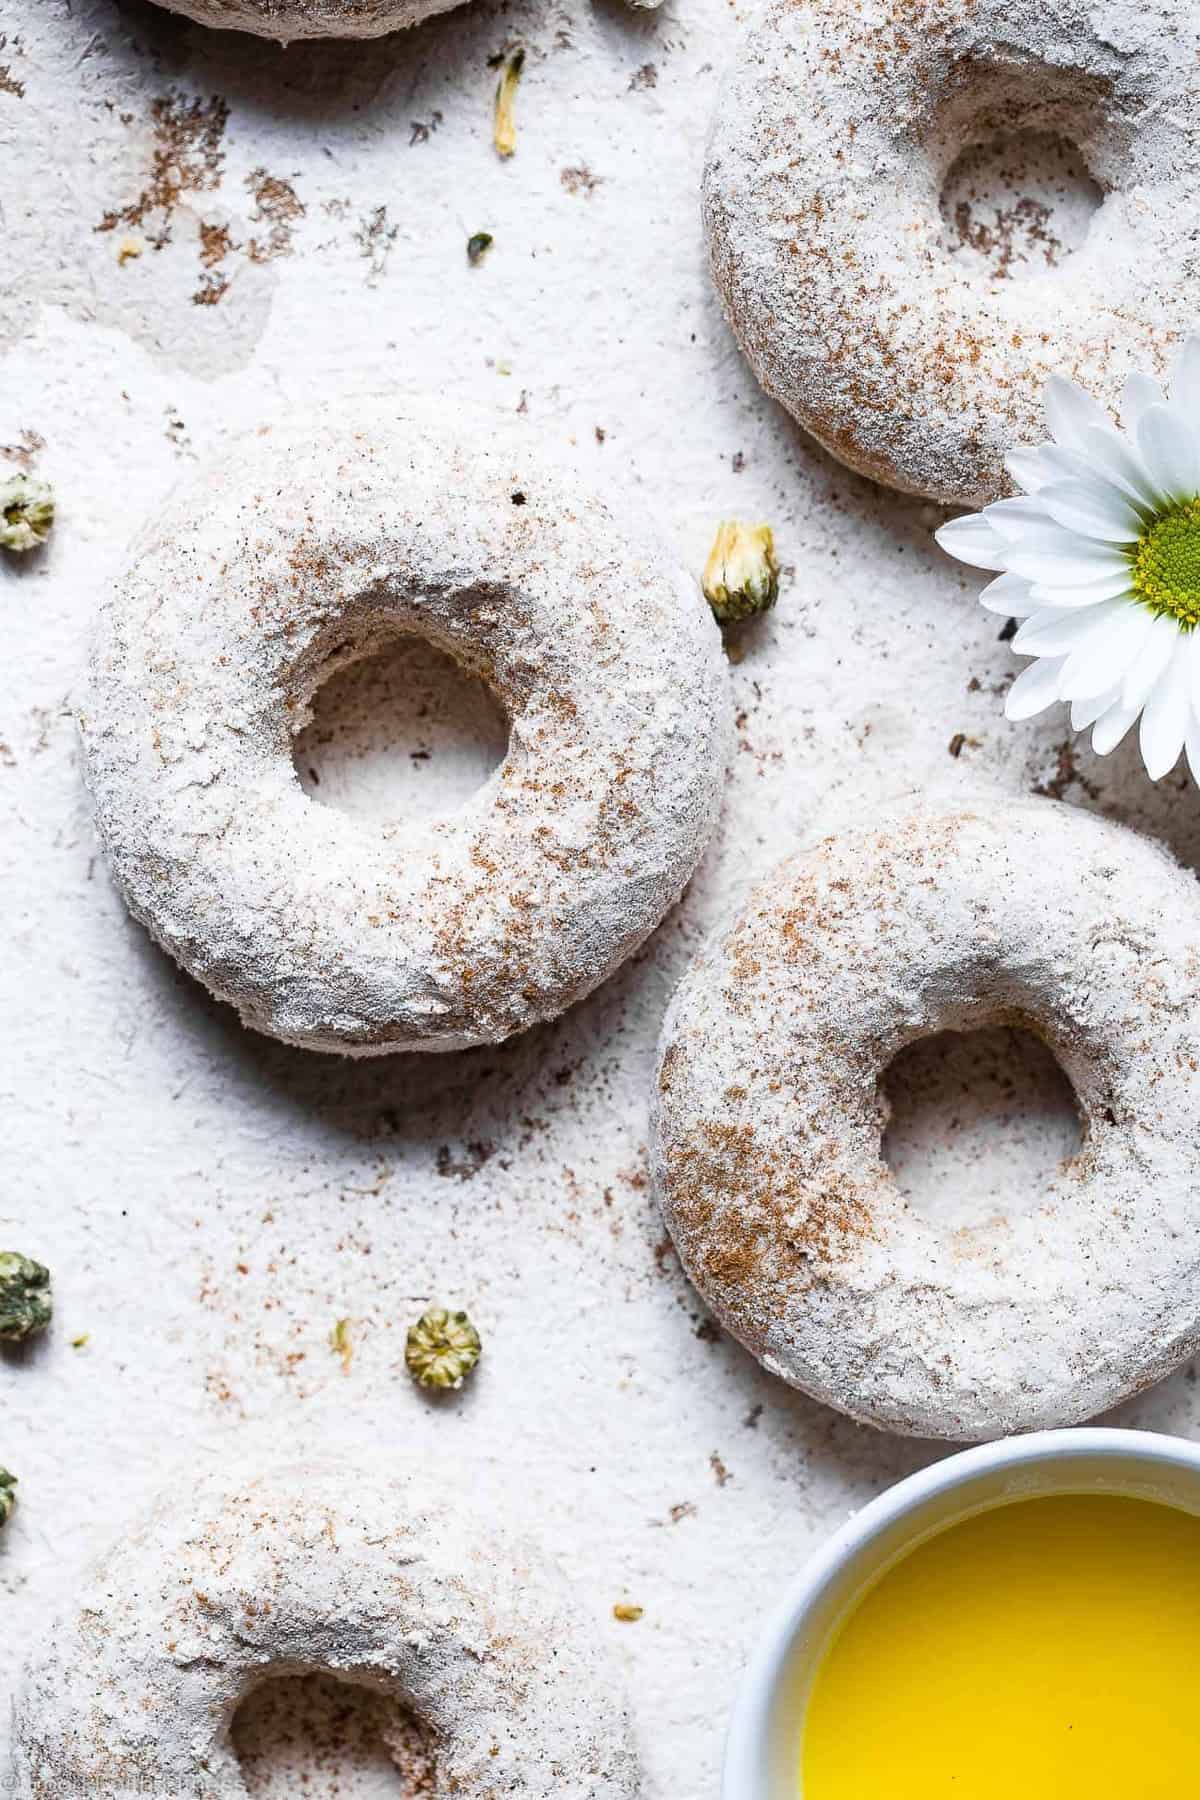 Cinnamon Baked Protein Donuts - This gluten free Healthy Protein Donuts Recipe is soft, fluffy and secretly protein packed! A perfect treat to curb your sweet tooth, and a dairy-free option is included! Great for kids and adults! | #Glutenfree #Dairyfree #Healthy #Donuts #Dessert